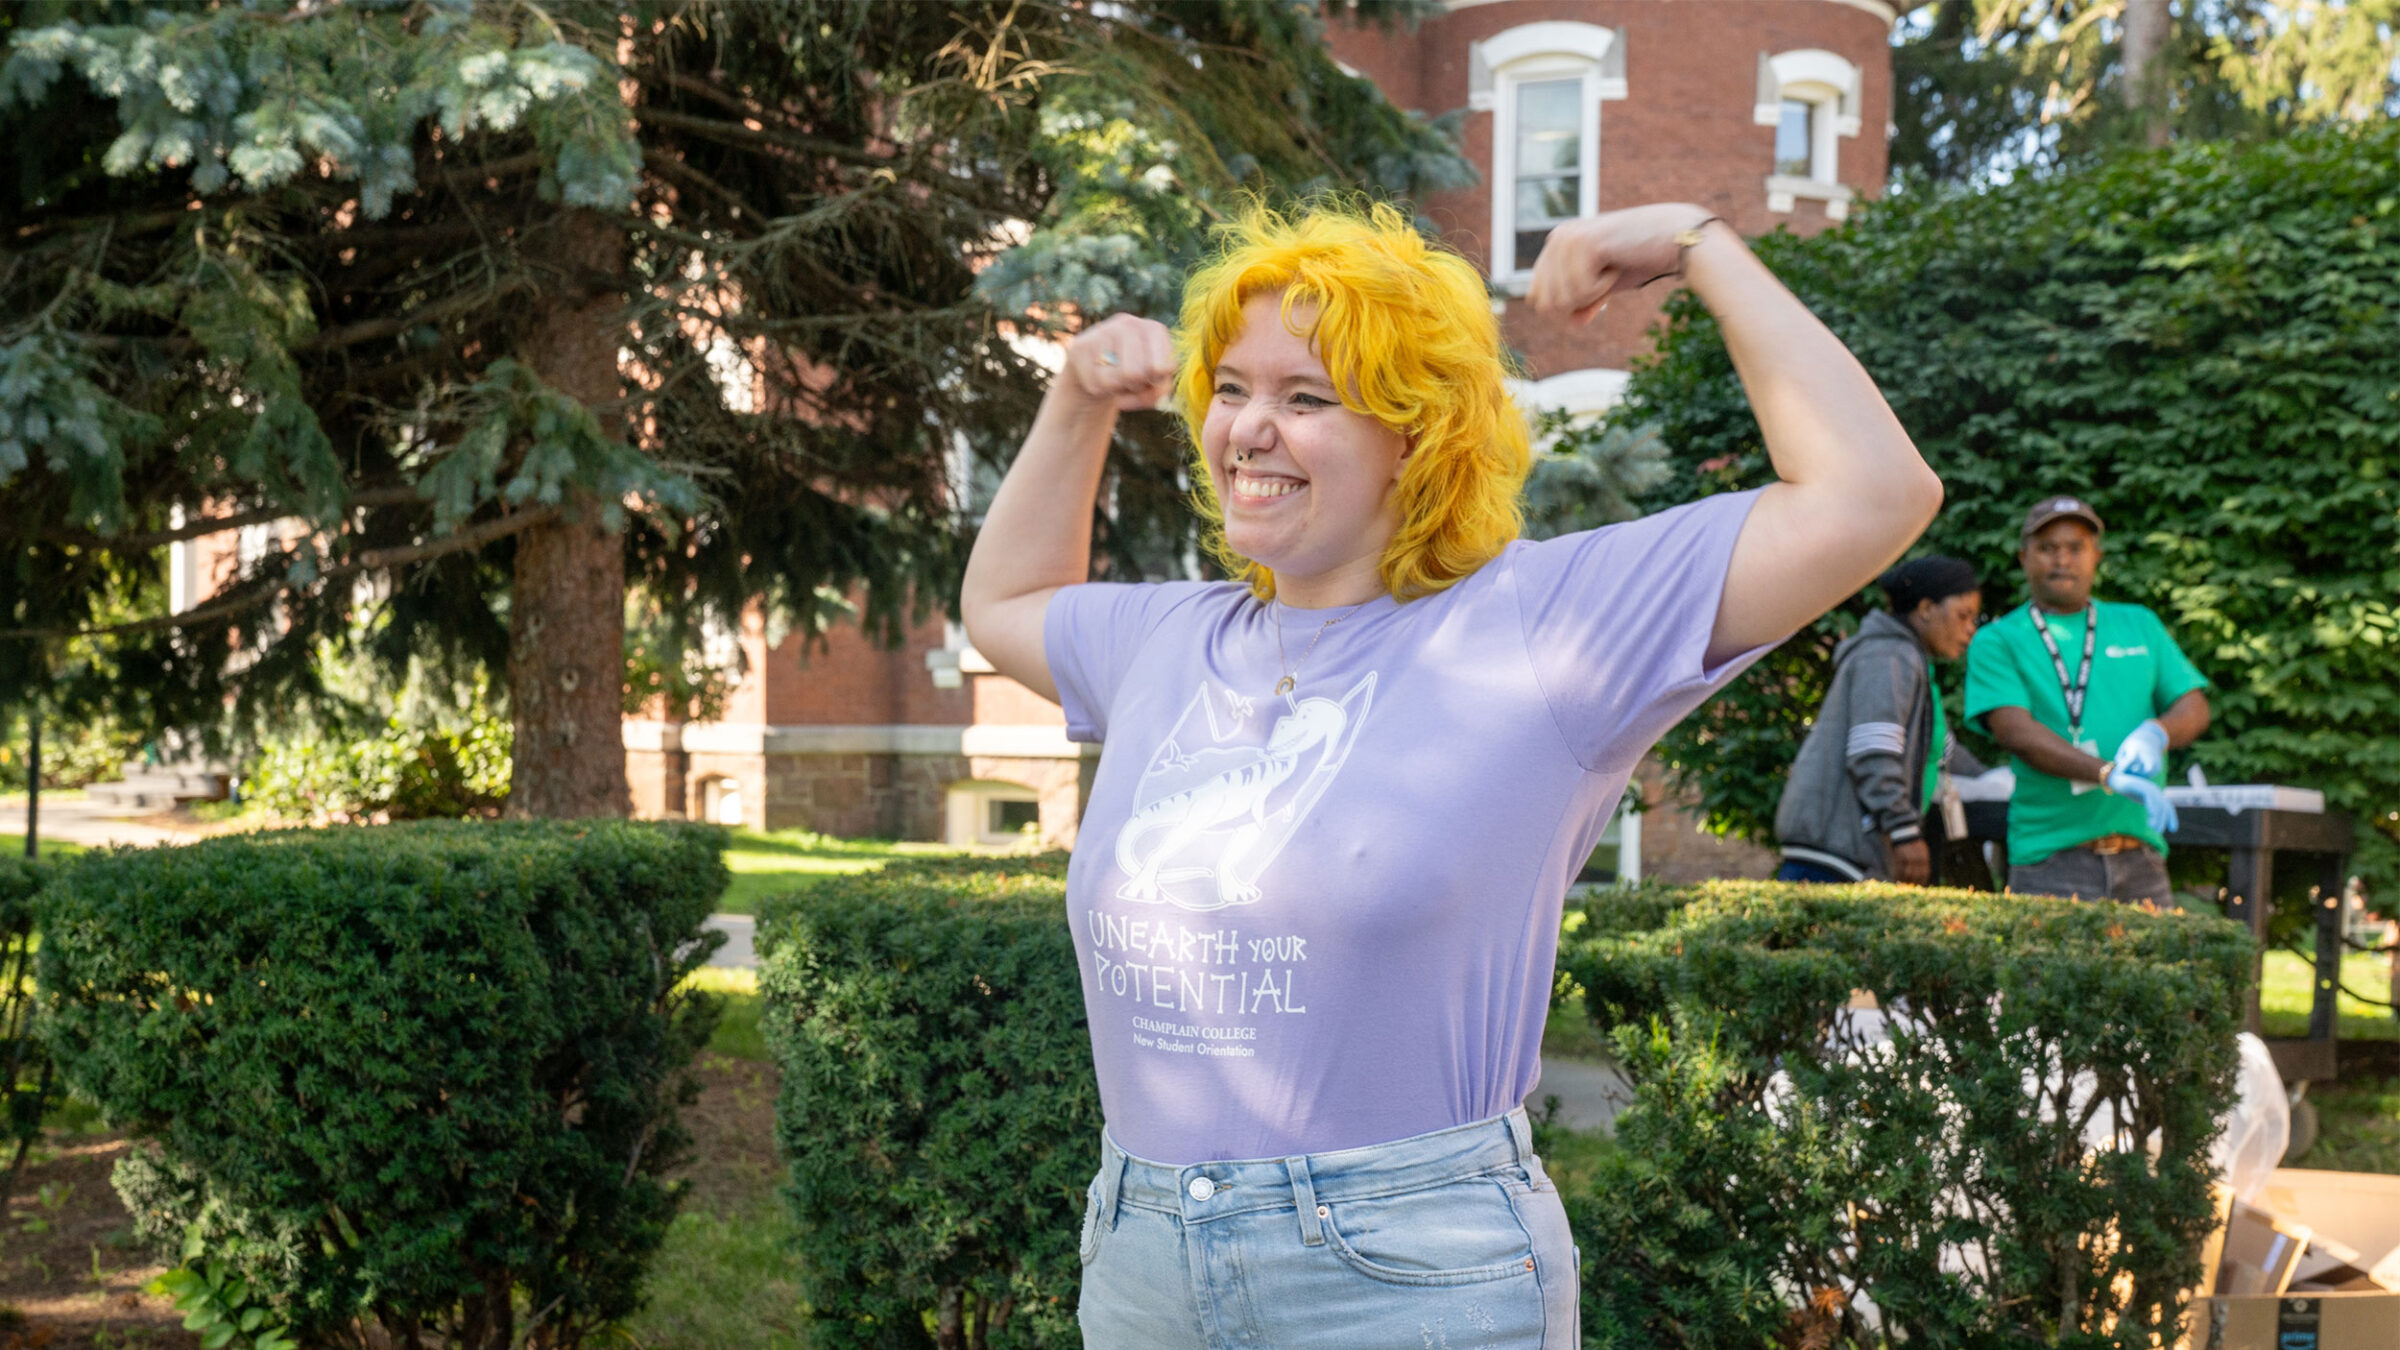 student in purple shirt and yellow hair holds their arms up in an "i'm strong" position